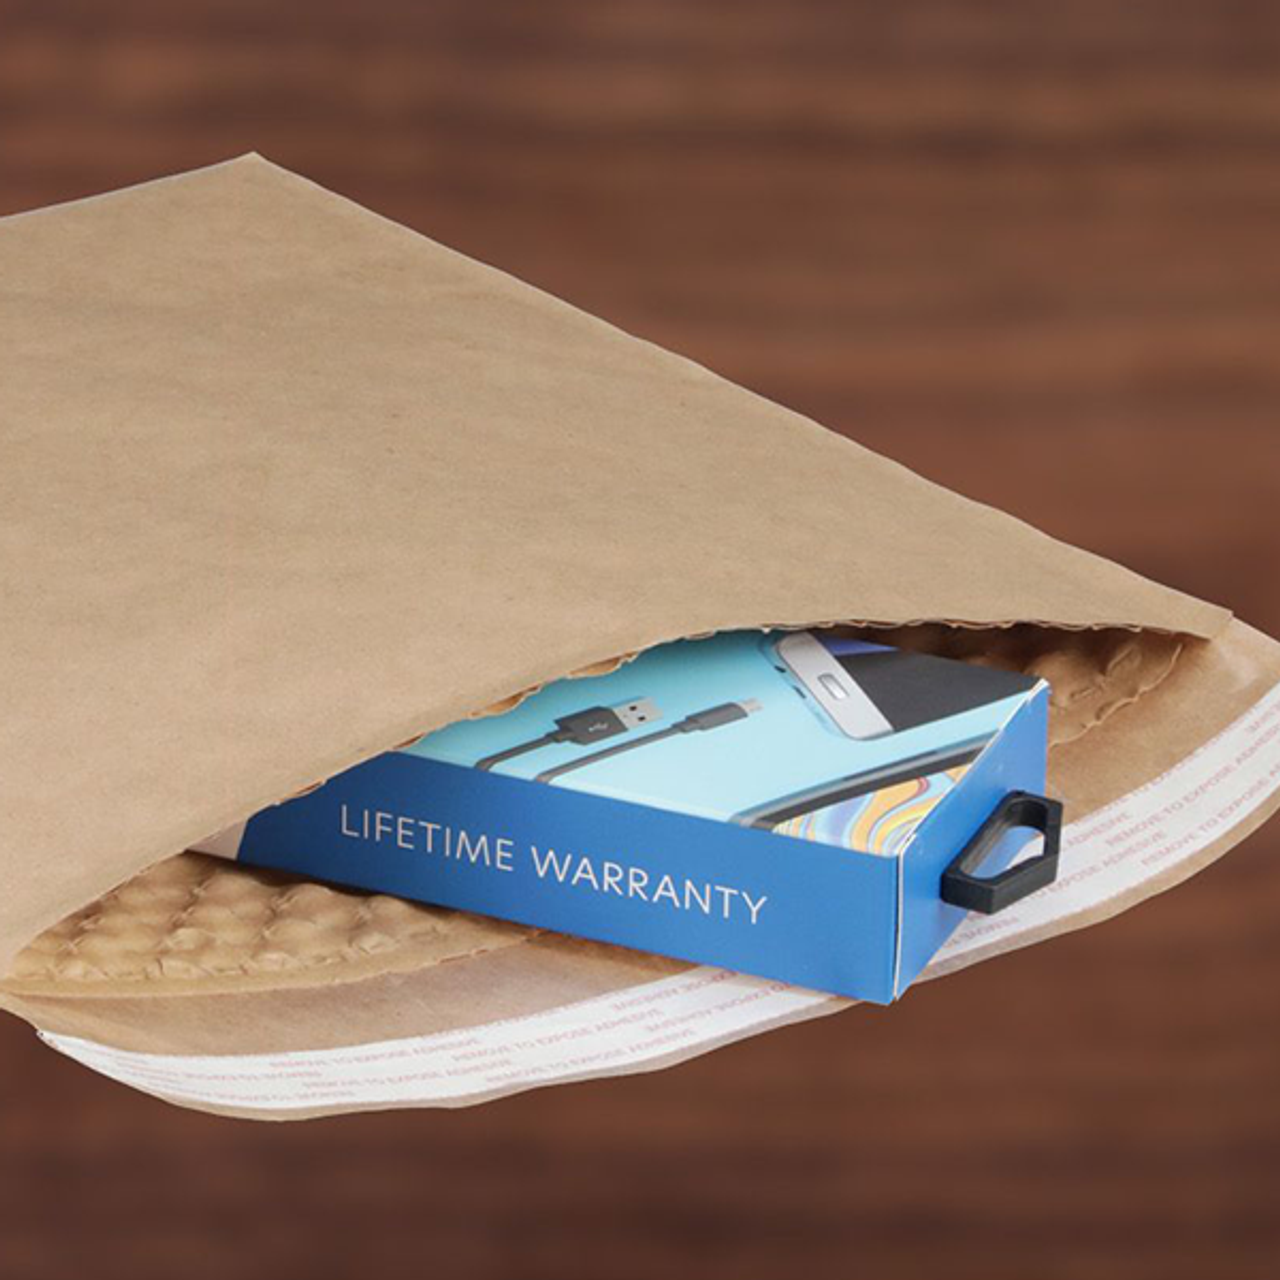 Kraft paper for eCommerce cushioning and tapes